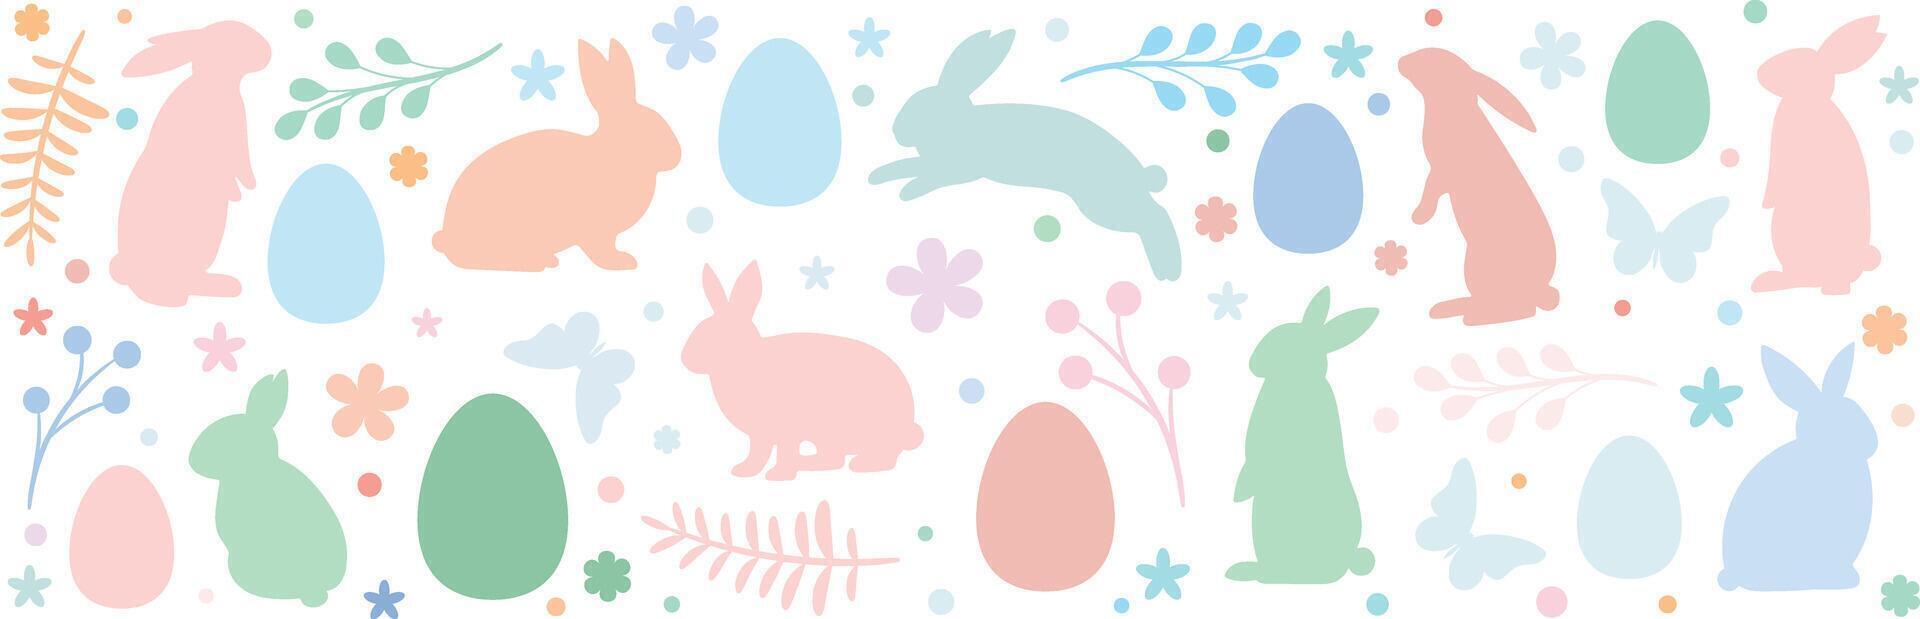 Pastel colorful Easter banner, holiday background design, greeting concept clip art illustration pattern with rabbits vector